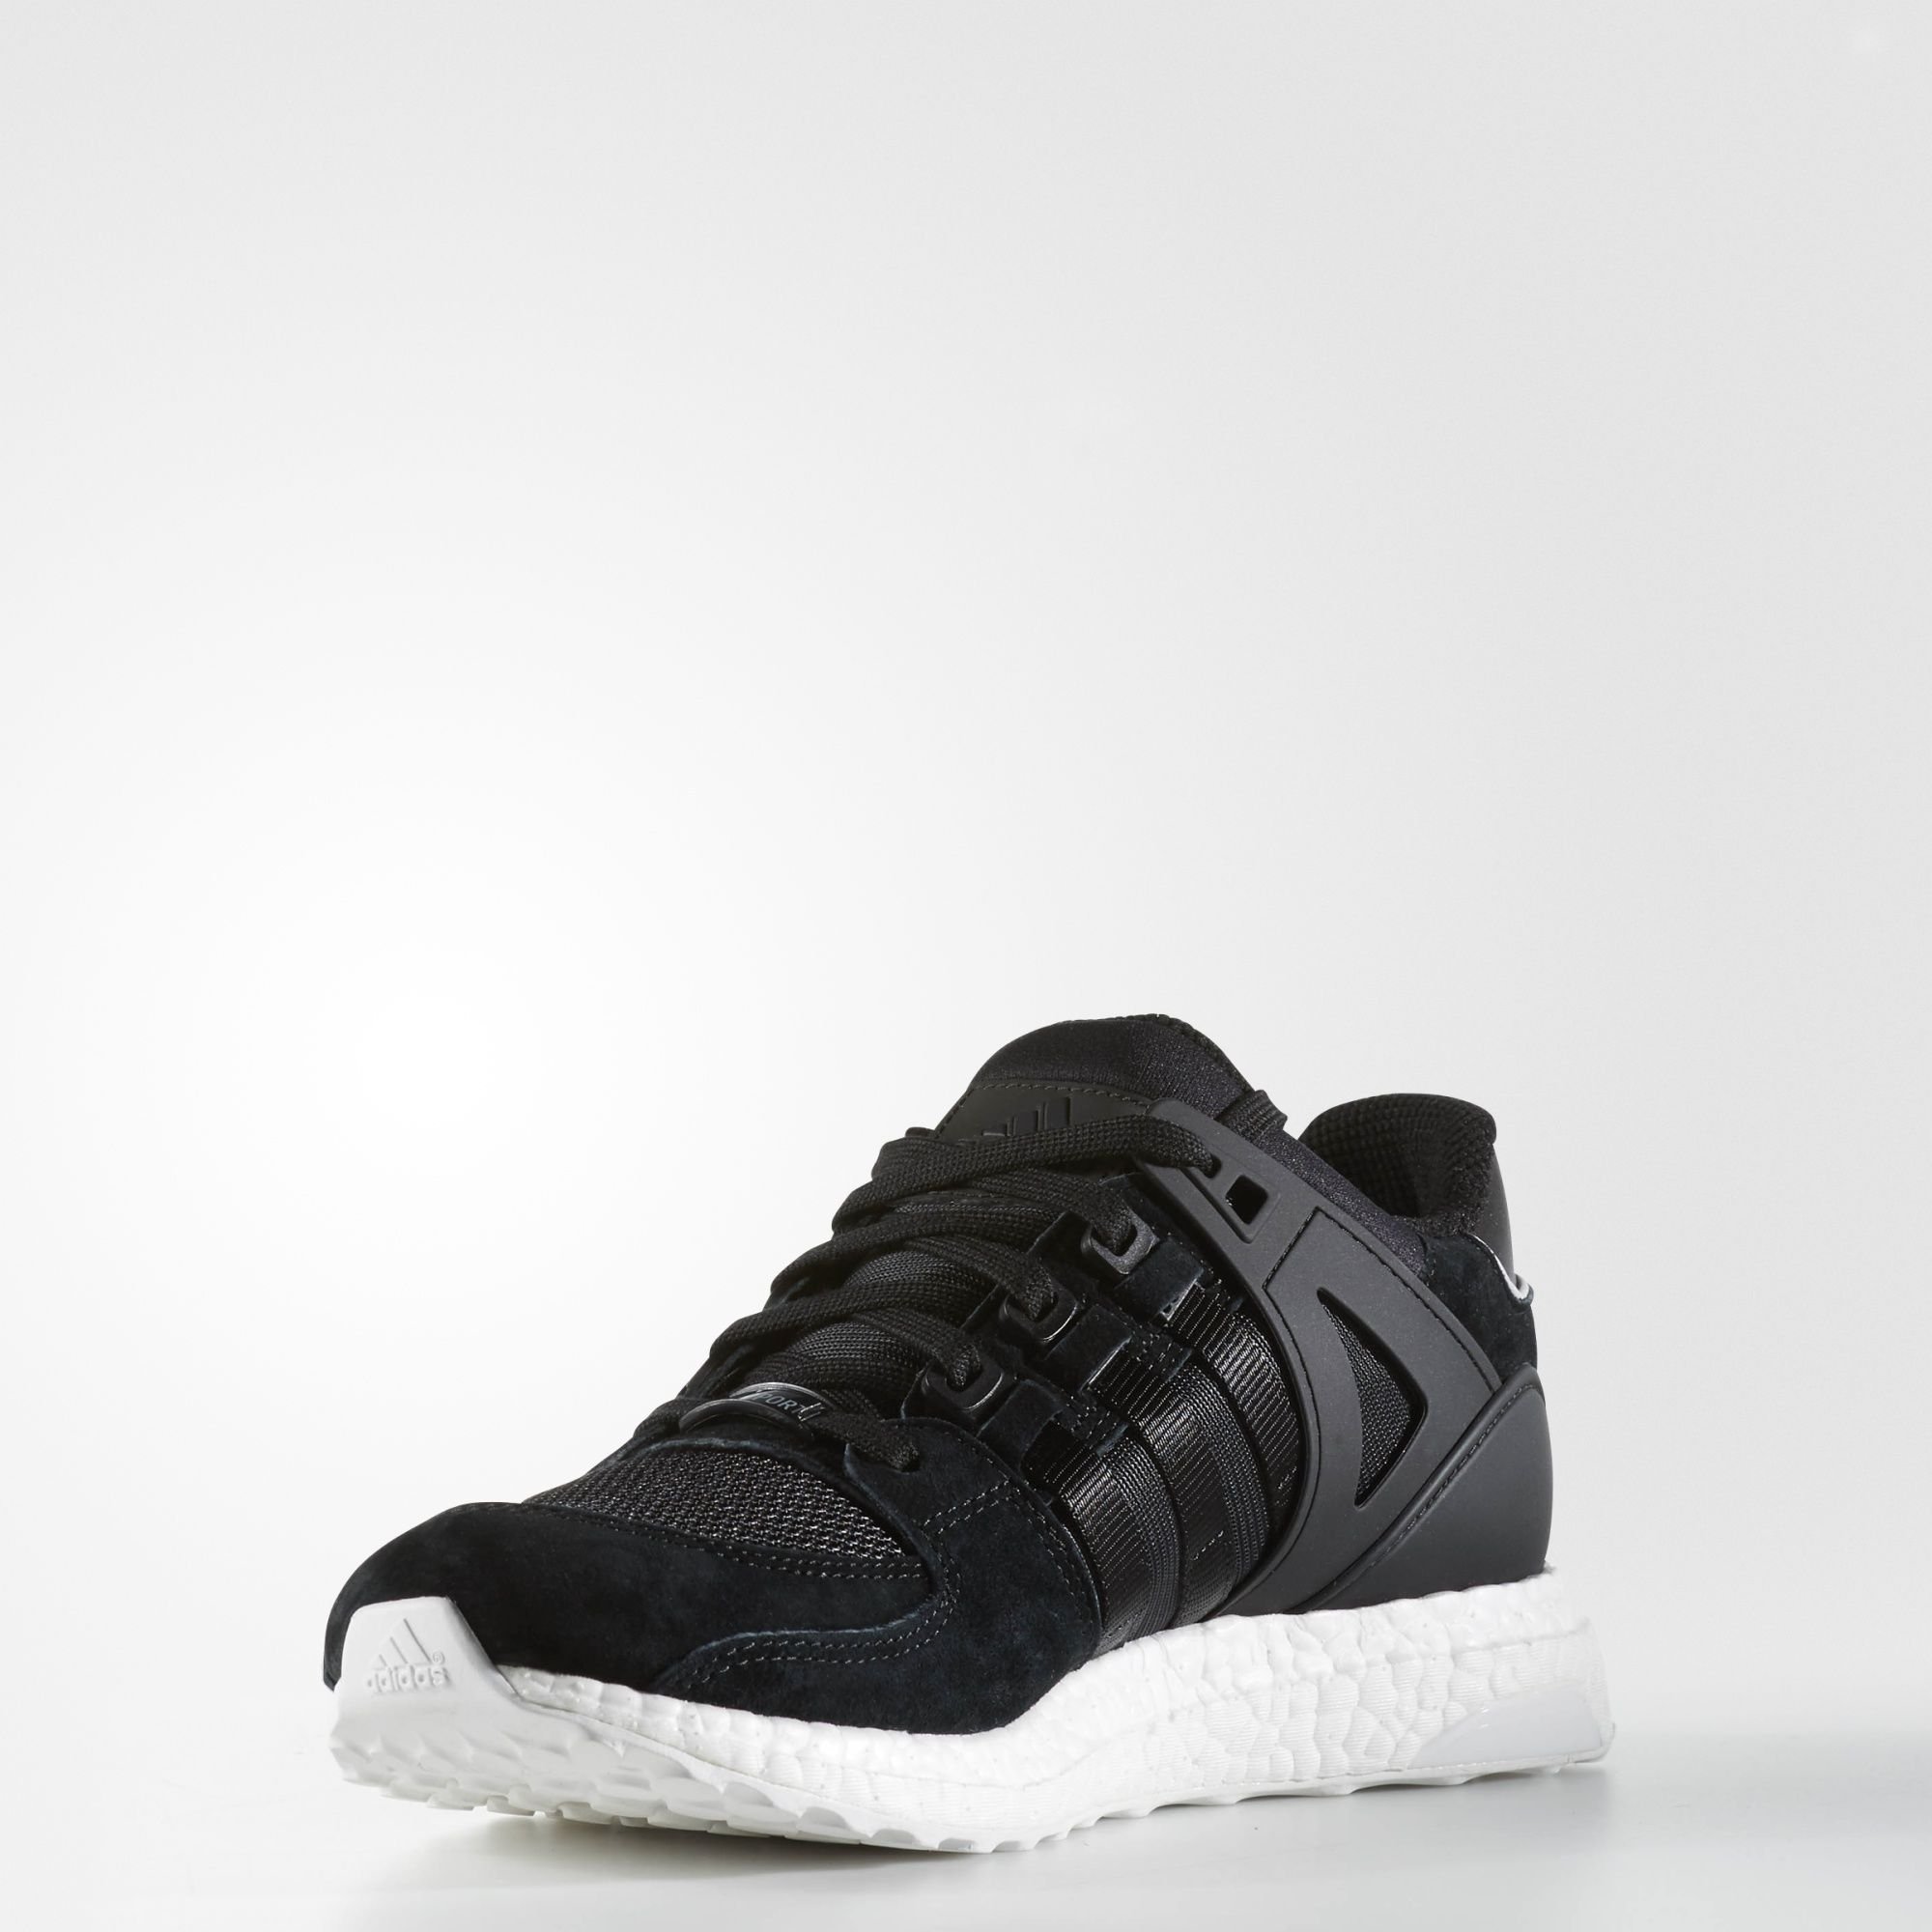 Buy EQT Support 93/16 'Black' - BY9148 | GOAT